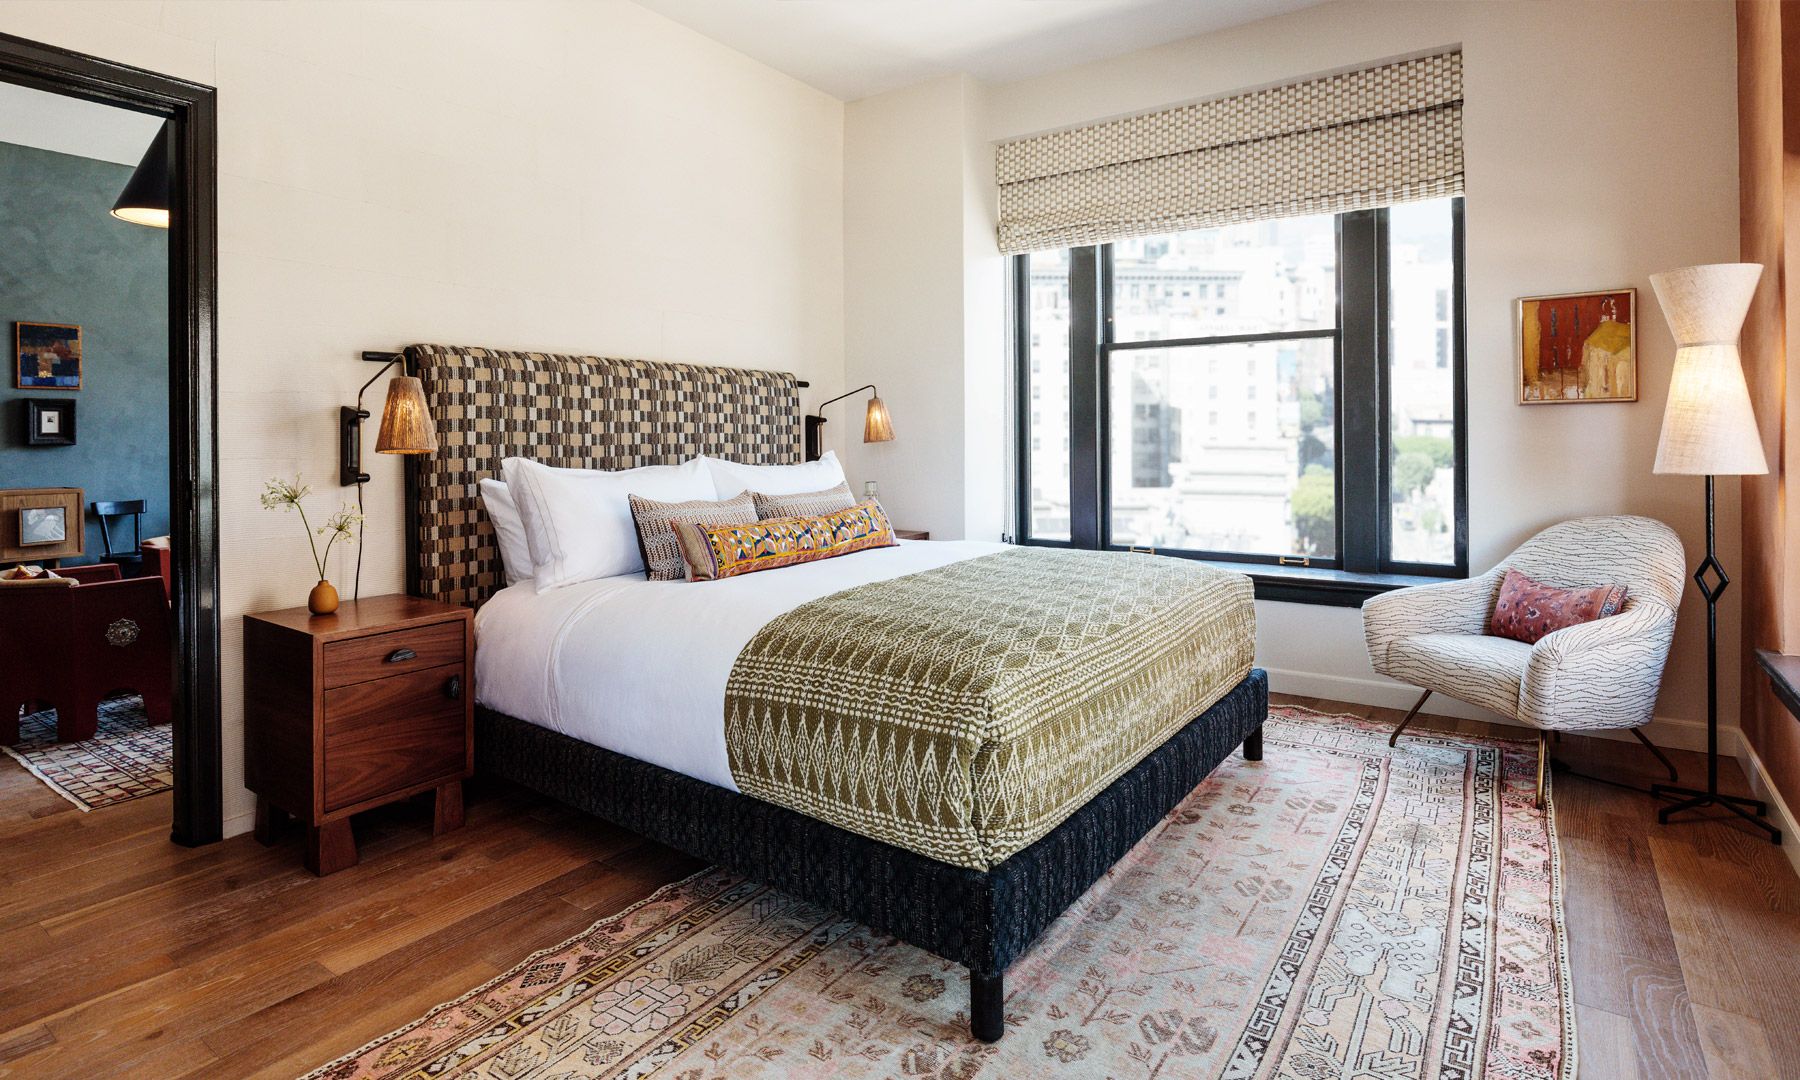 Room Attendant at Proper Hotel, Downtown Los Angeles